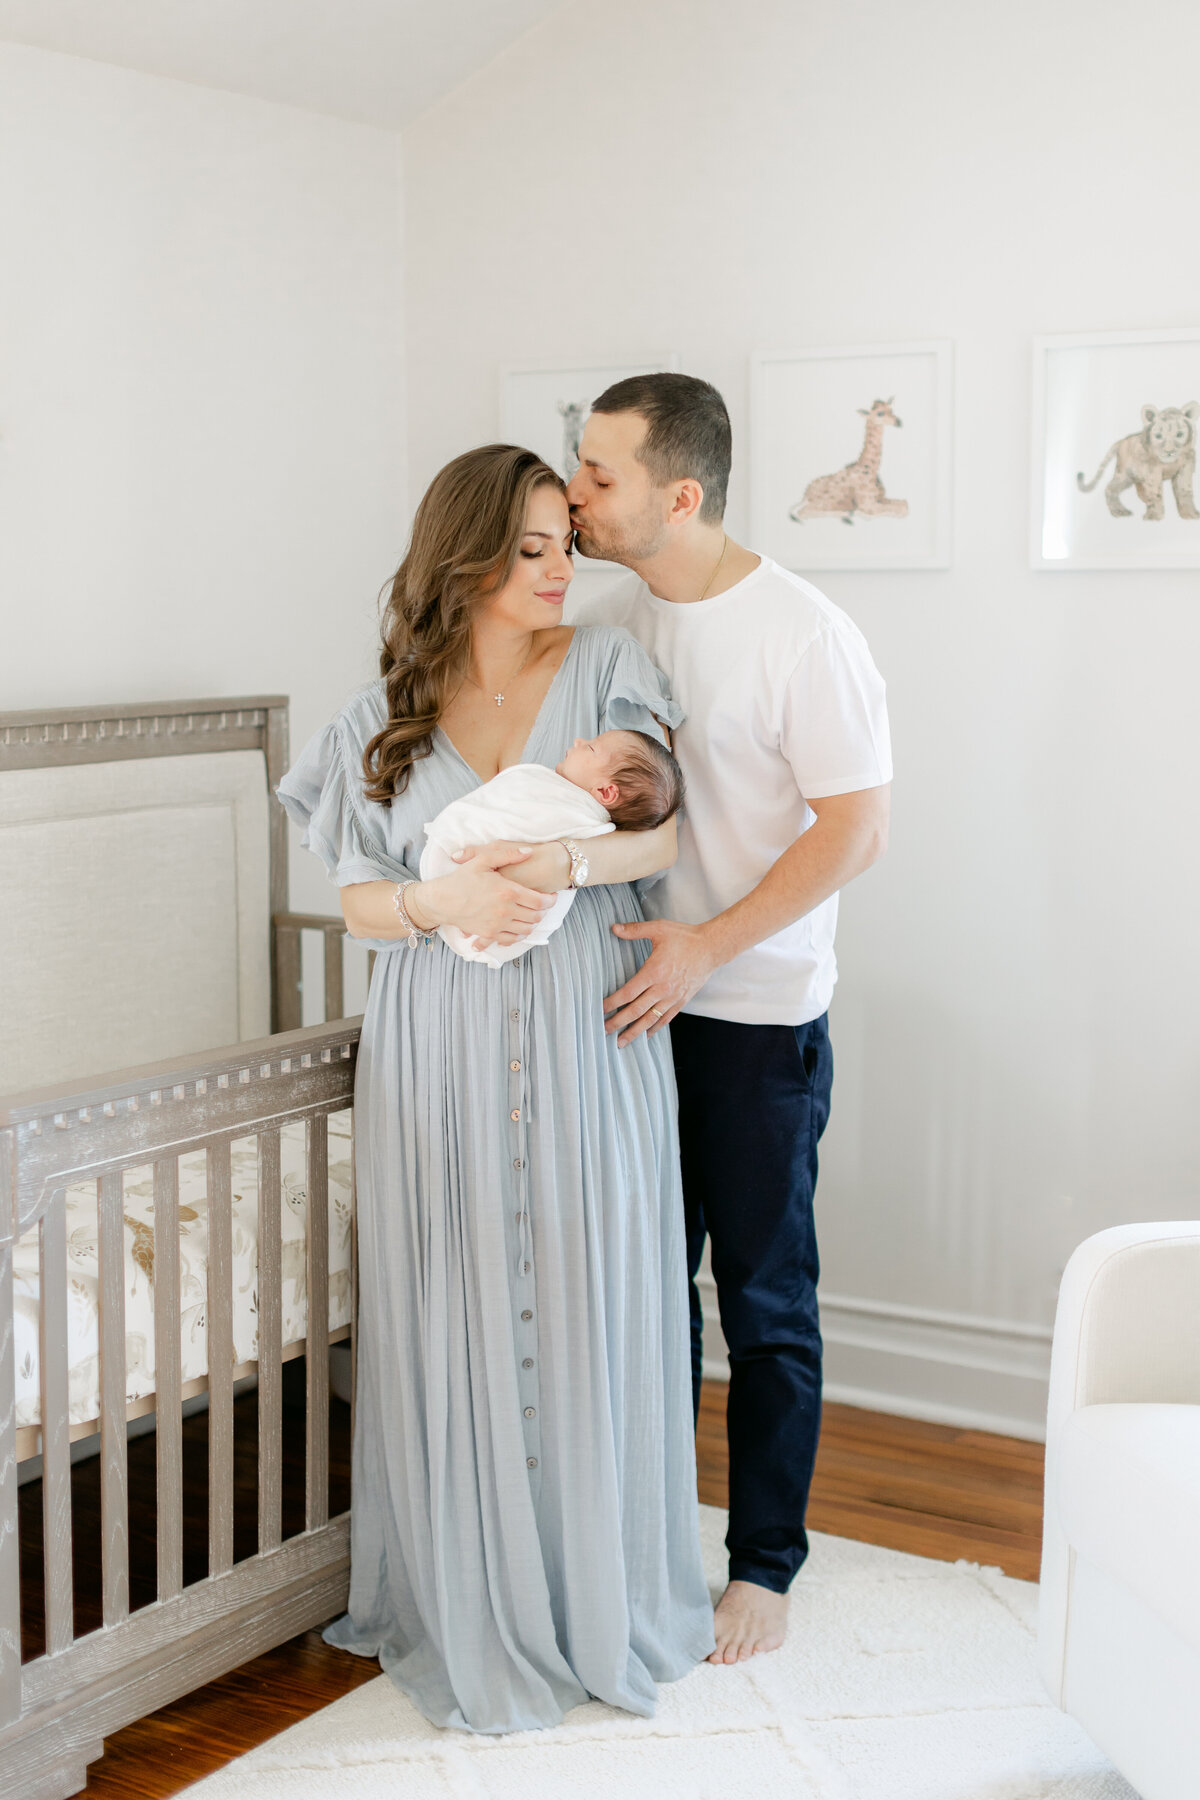 Mom and dad embrace in their baby's nursery during their newborn session photographed by Philadelphia Newborn Photographer Tara Federico